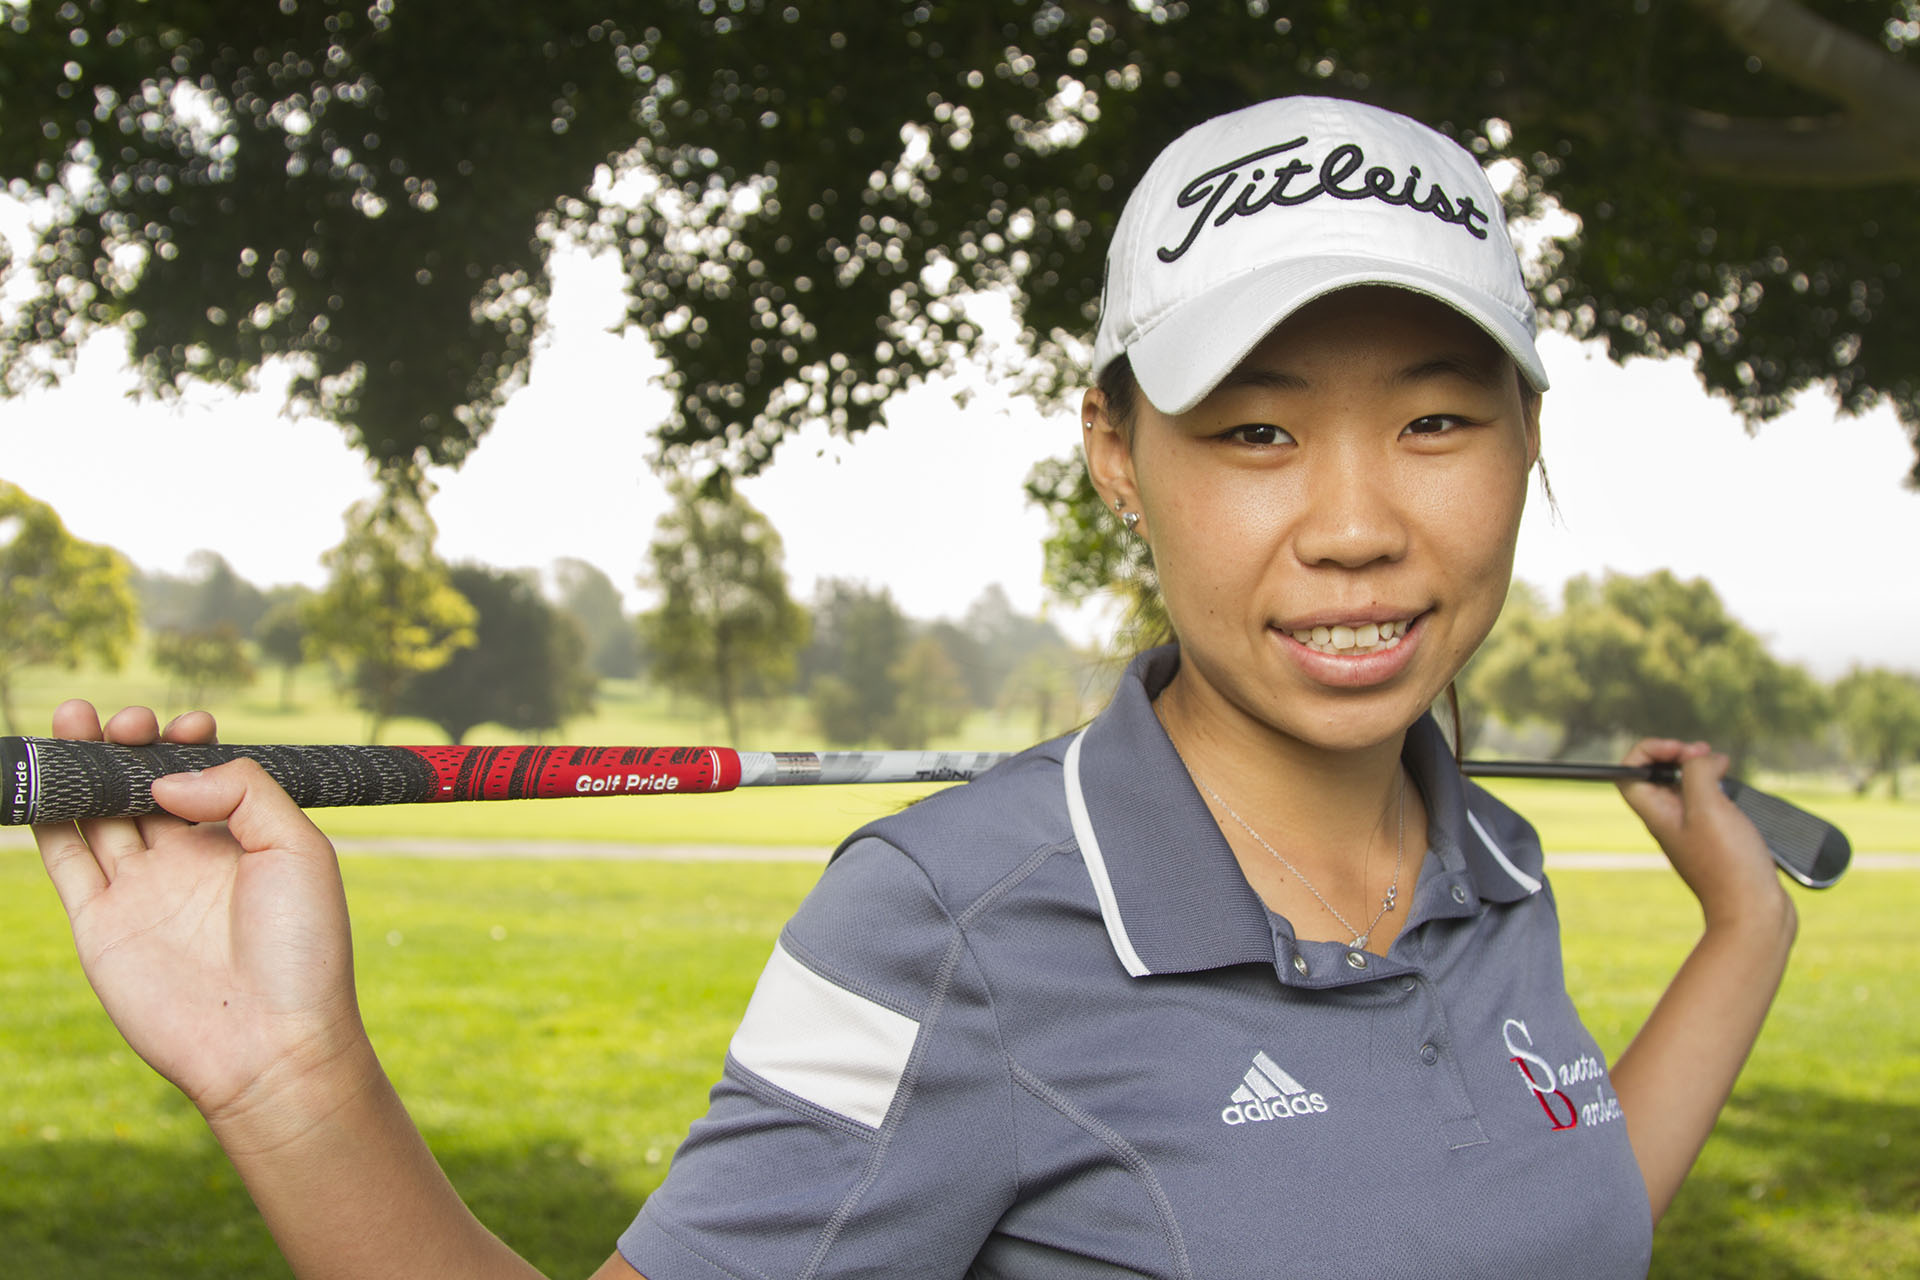 Normalisering abstrakt Allieret SBCC women's golf champion shoots for professional league – The Channels